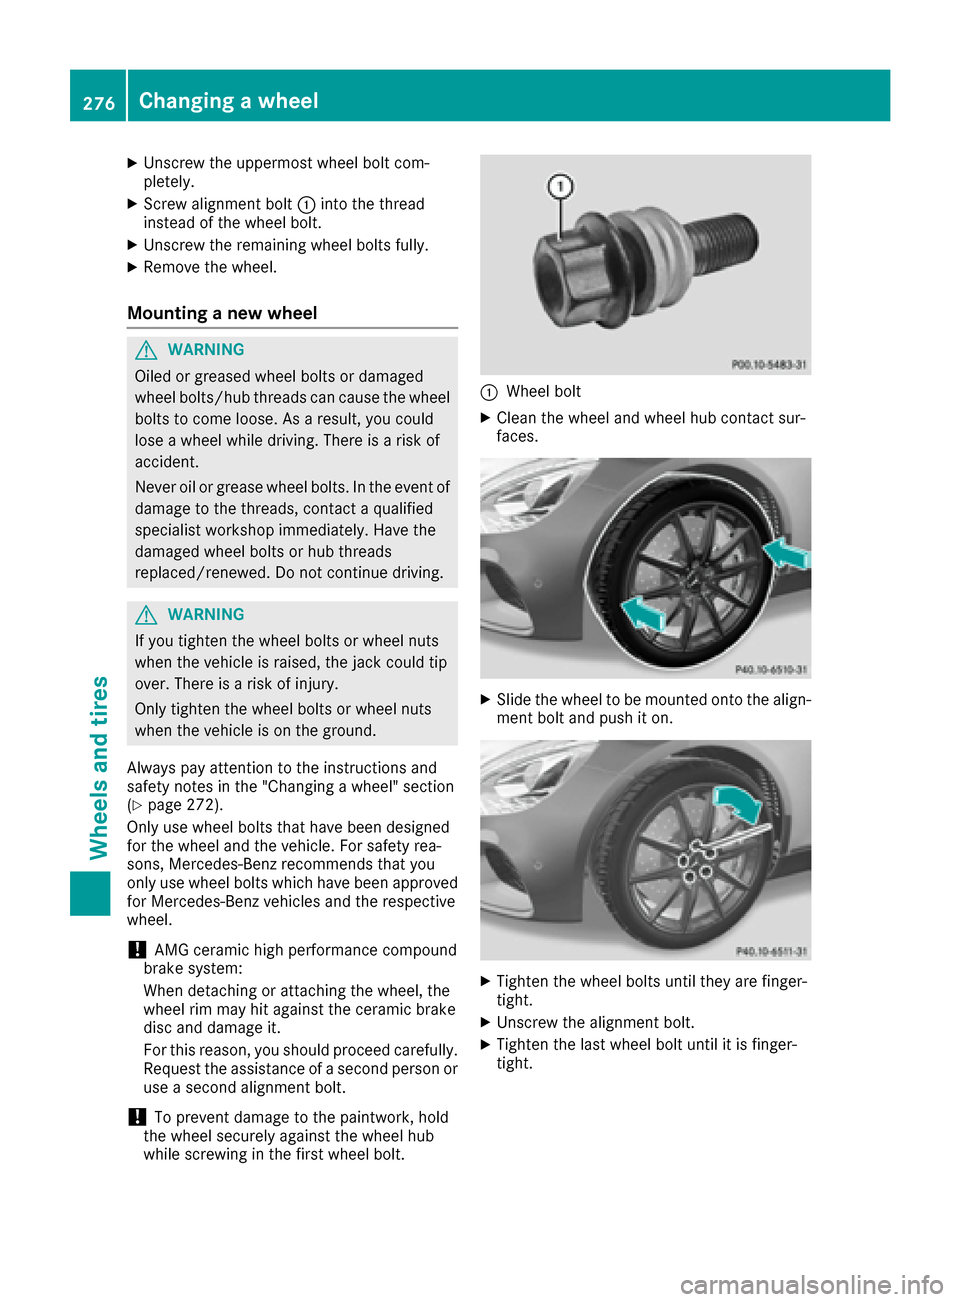 MERCEDES-BENZ AMG GT S 2016 C190 Owners Manual XUnscrew the uppermost wheel bolt com-
pletely.
XScrew alignment bolt:into the thread
instead of the wheel bolt.
XUnscrew the remaining wheel bolts fully.
XRemove the wheel.
Mounting a new wheel
GWARN